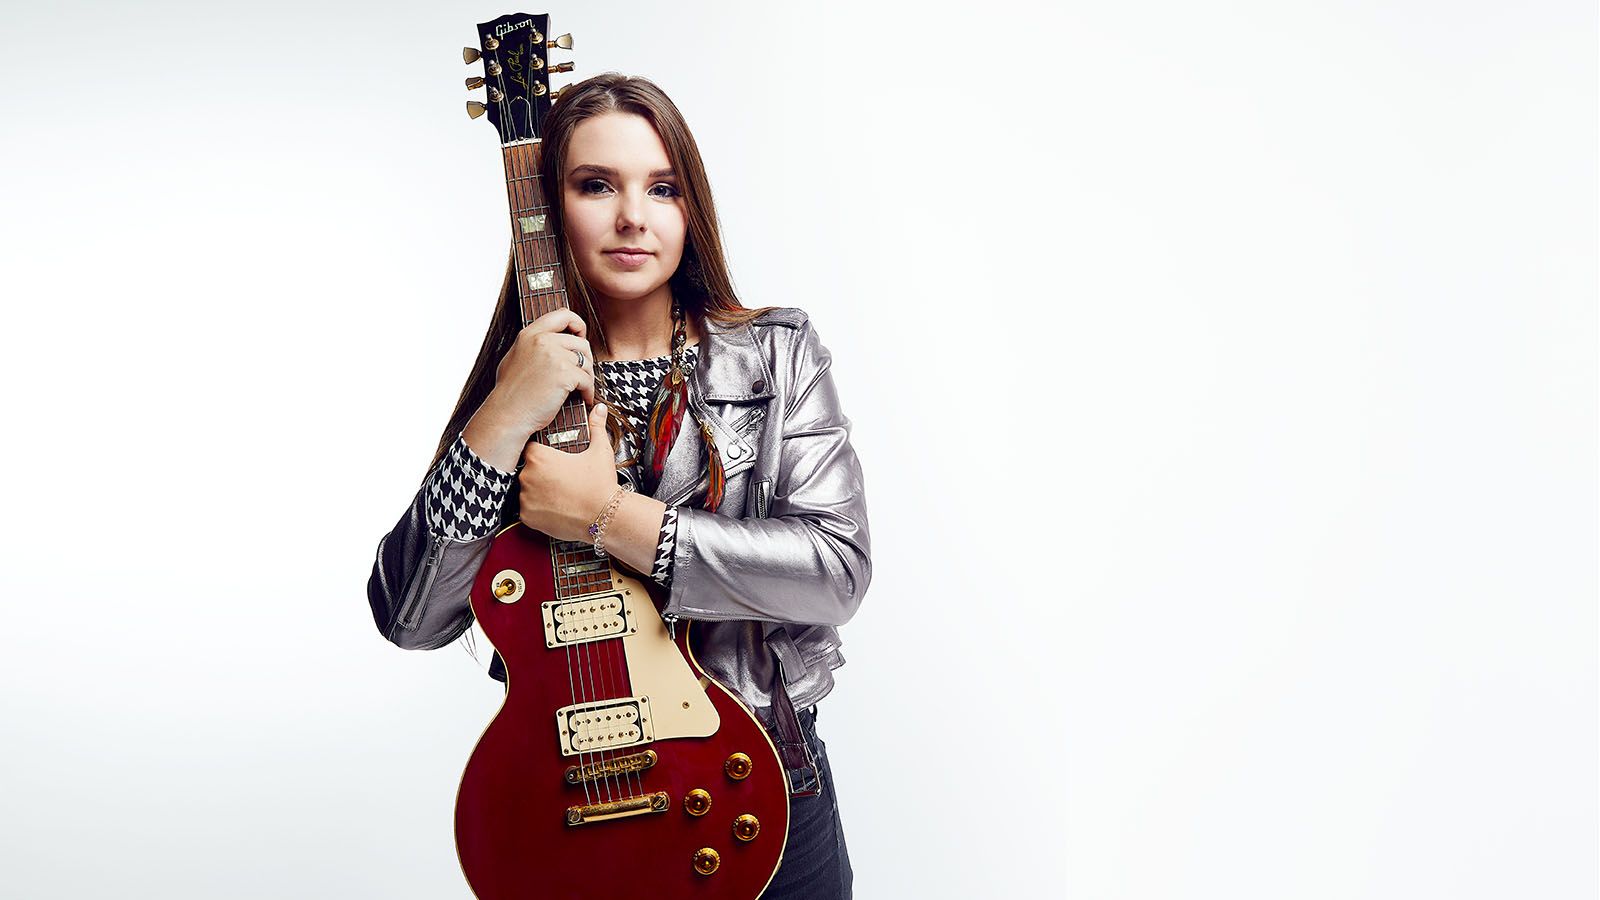 Blues guitarist Ally Venable will perform at Baker Street Centre on Saturday, March 9.